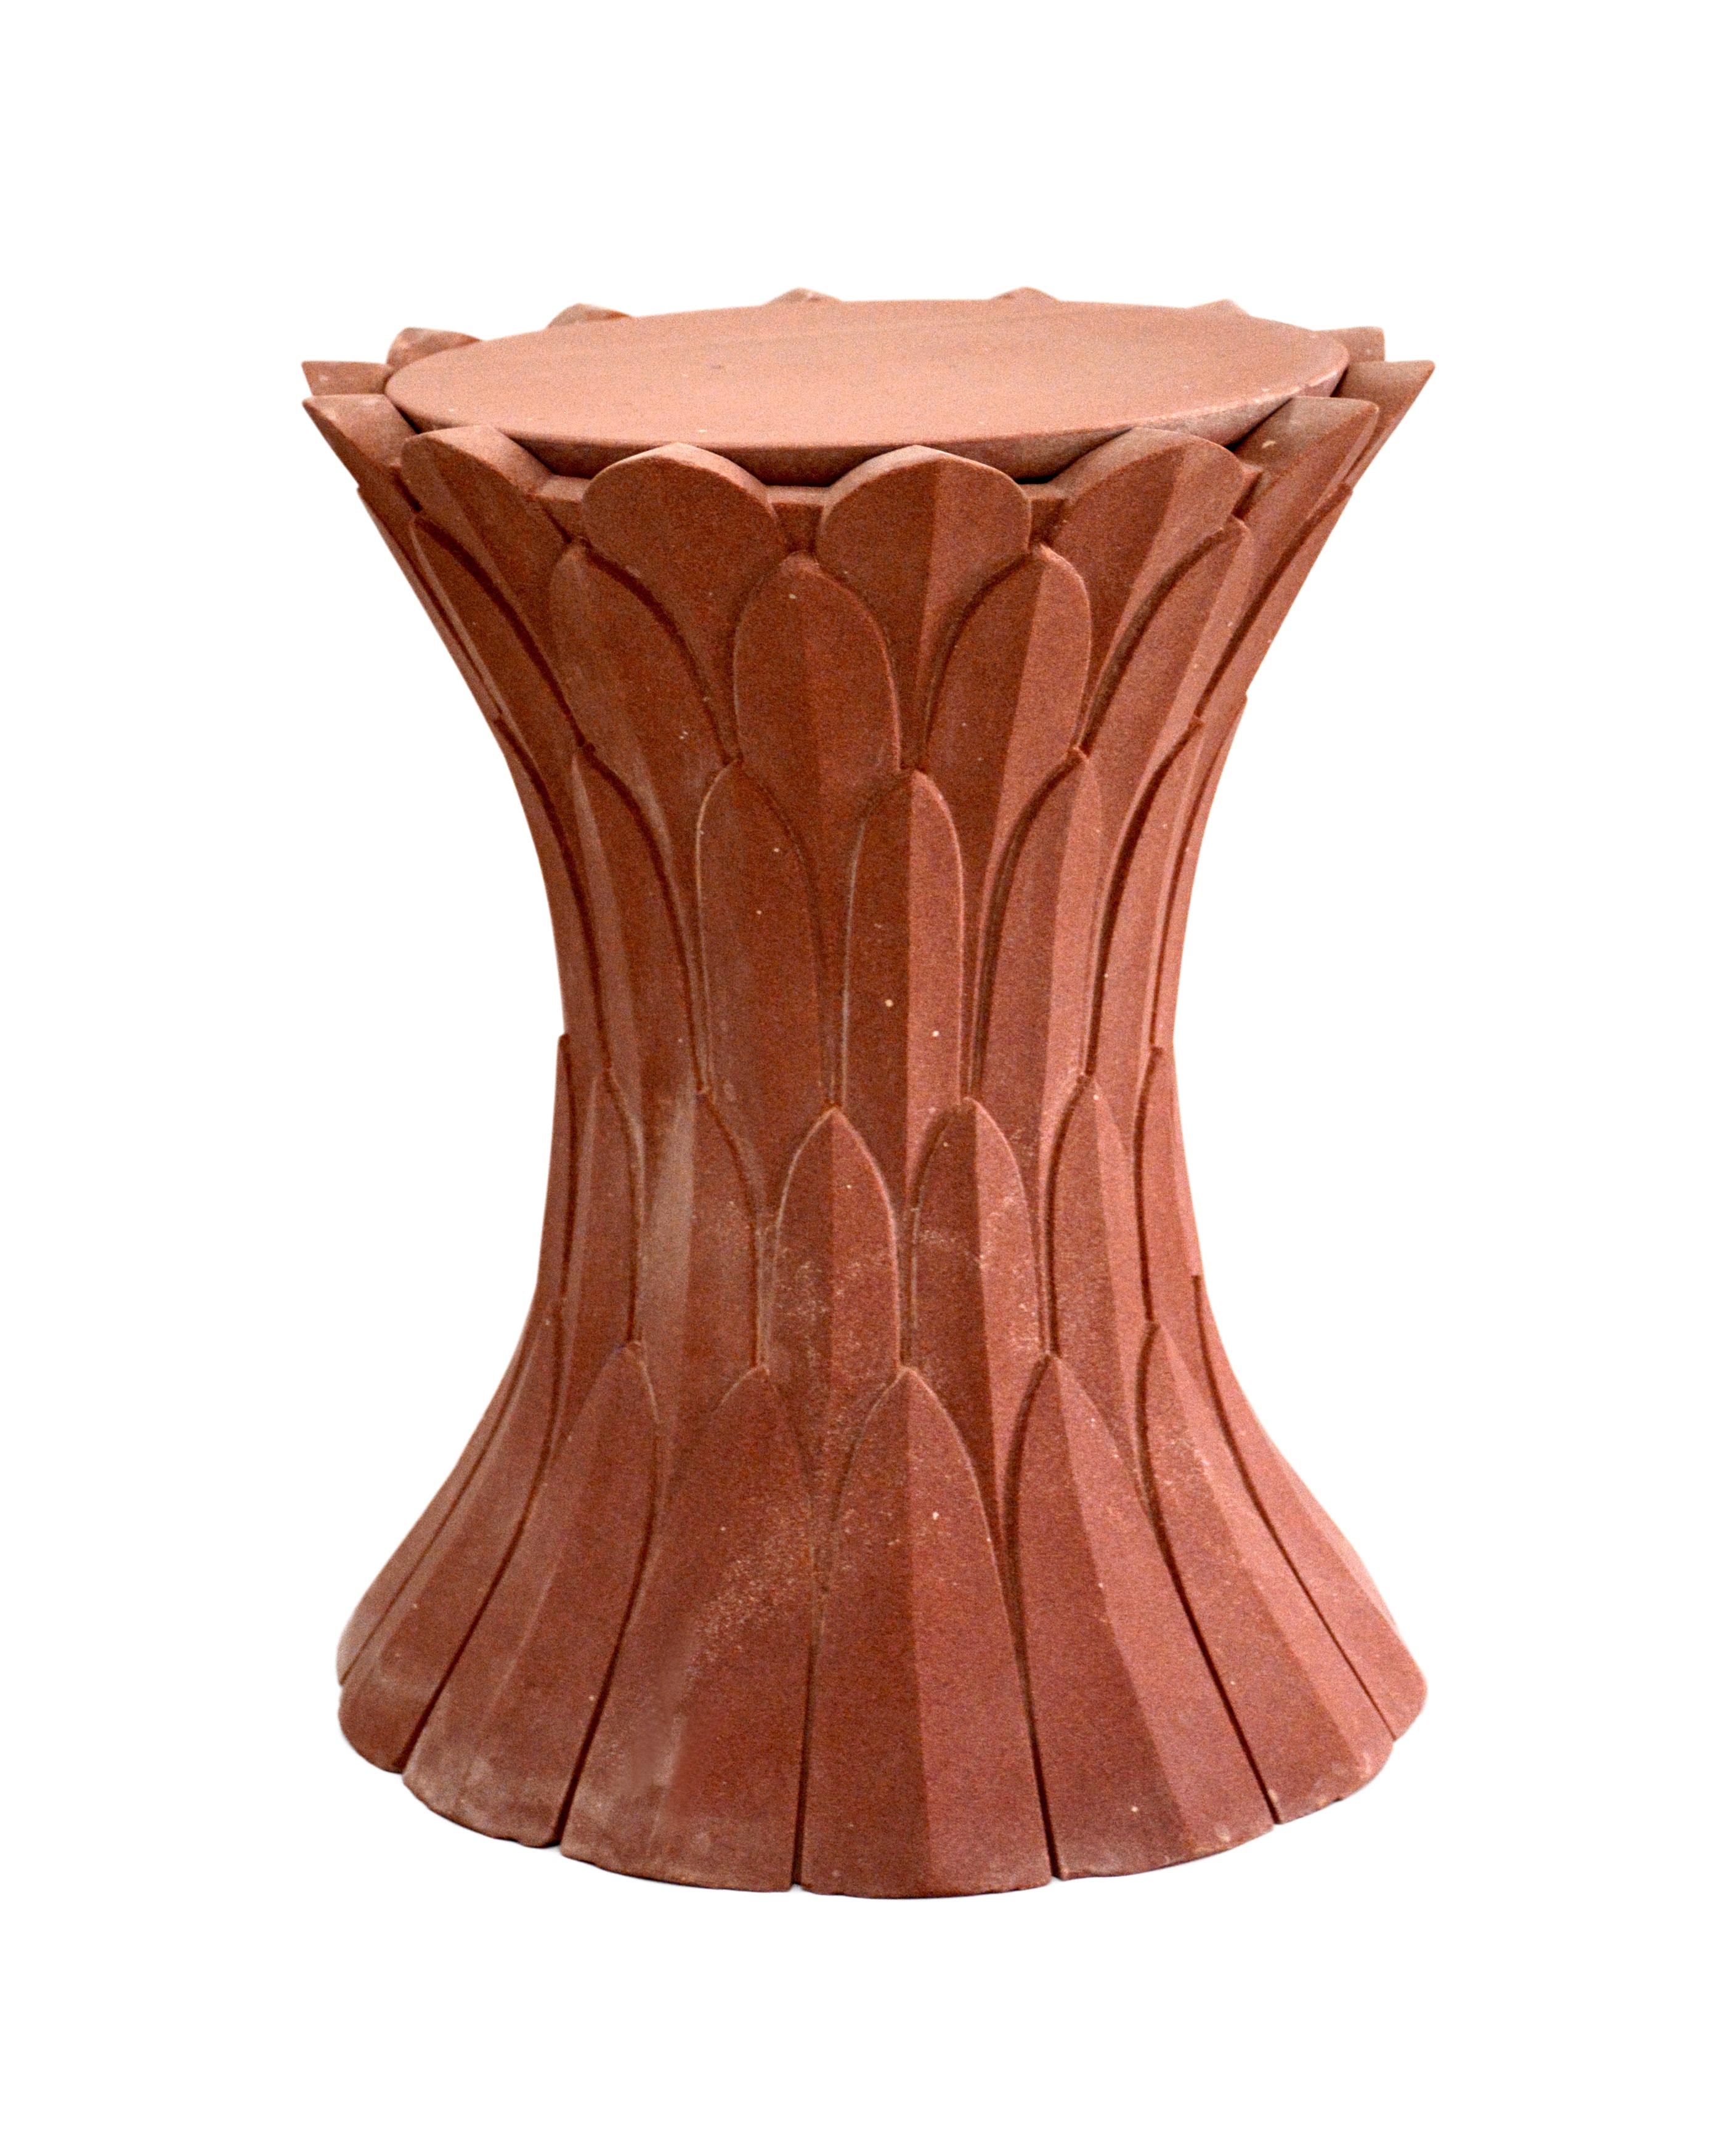 red stone table